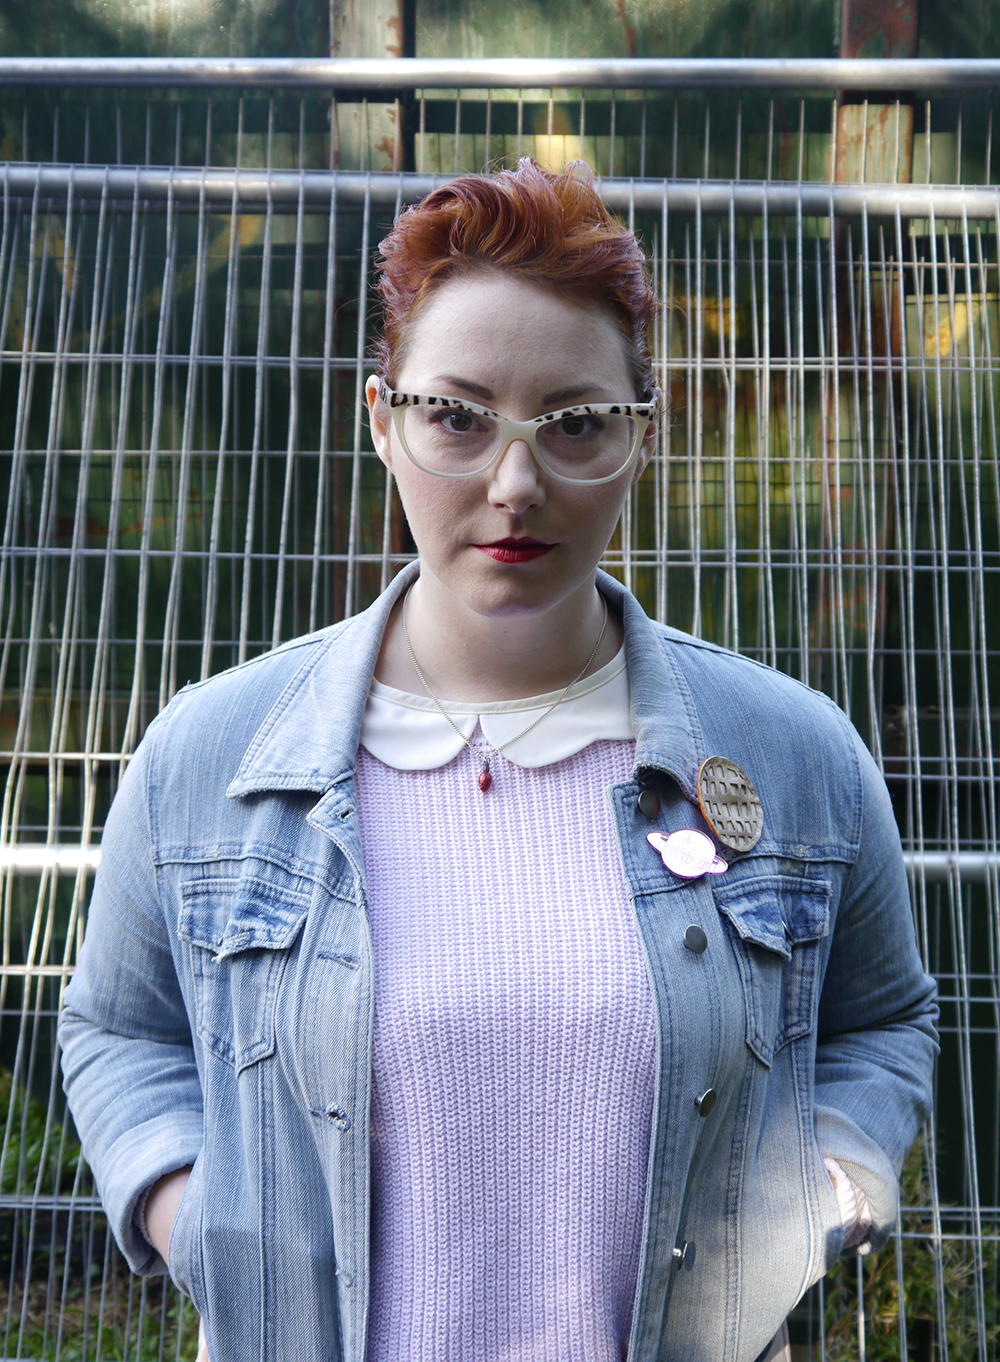 unlikely style icon, costume inspiration, Stranger Things, Eleven from Stranger Things, Stranger Things inspired outfit, Spex Pistols glasses, Cheap Frills christmas light necklace, denim jacket, pink outfit, Eat Me do socks , Wear Eponymous skirt, Eggo brooch, bonnie bling brooch, Lucky Dip club brooch